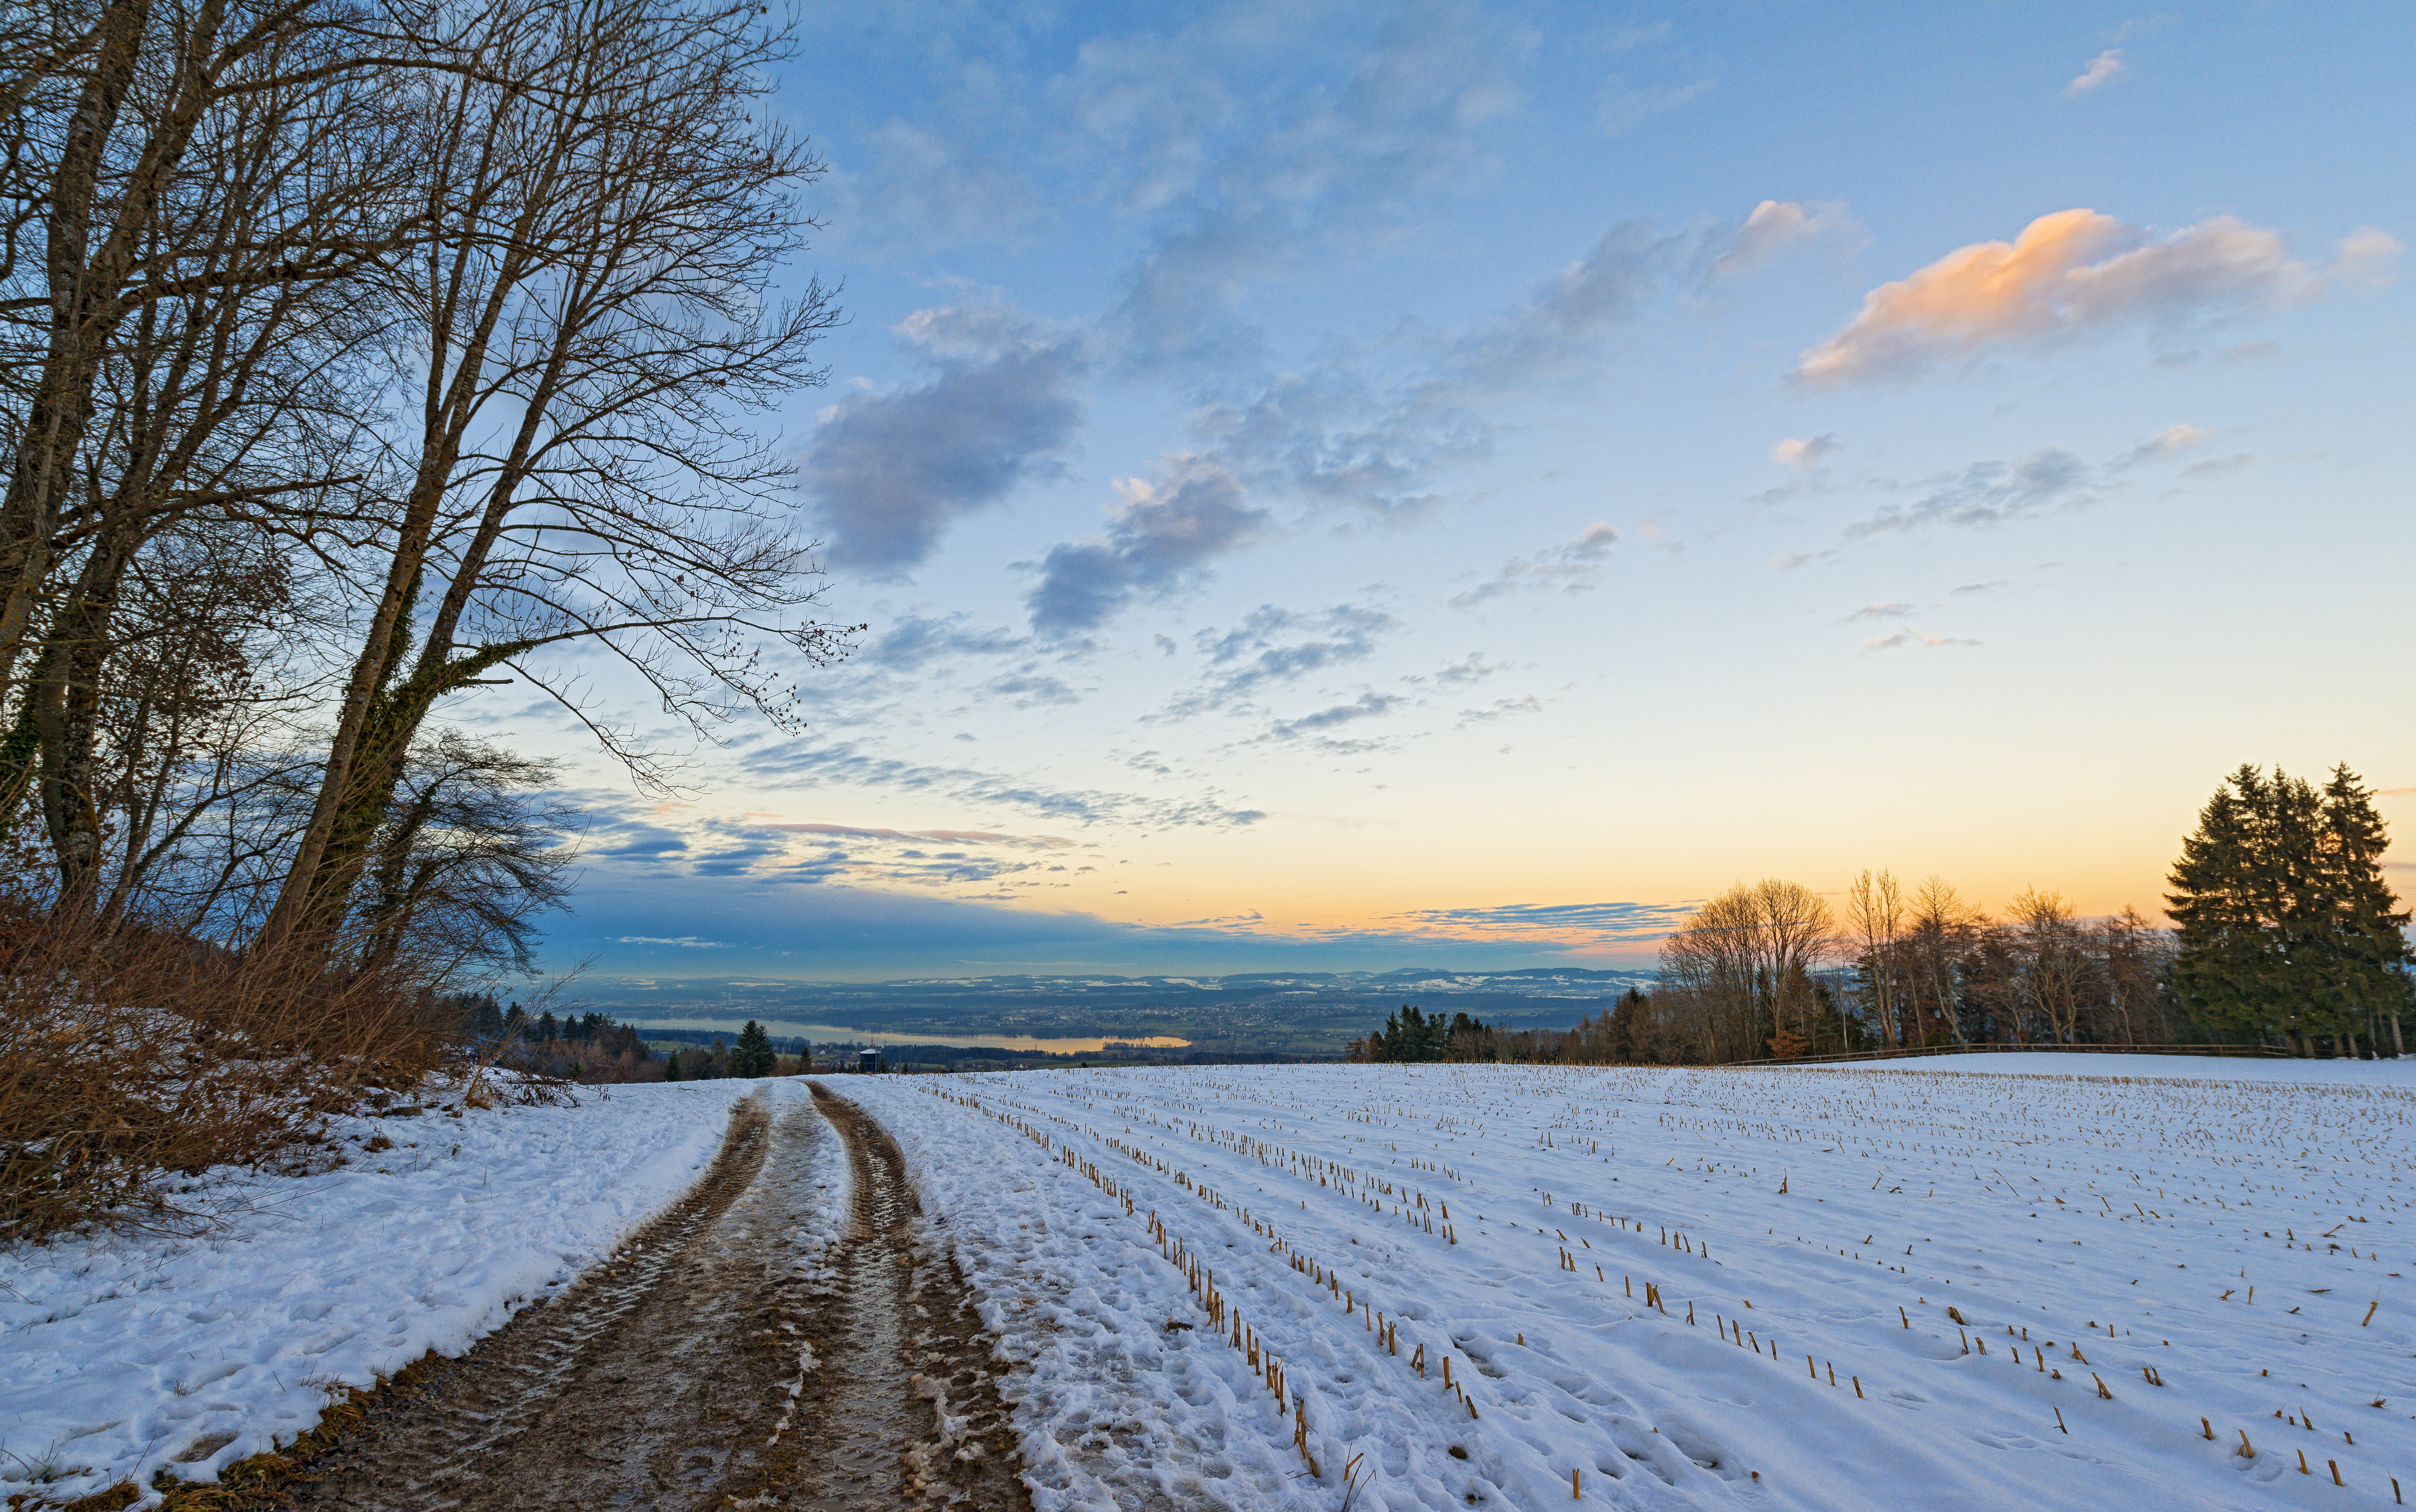 The road in the winter field wallpapers and images - wallpapers ...